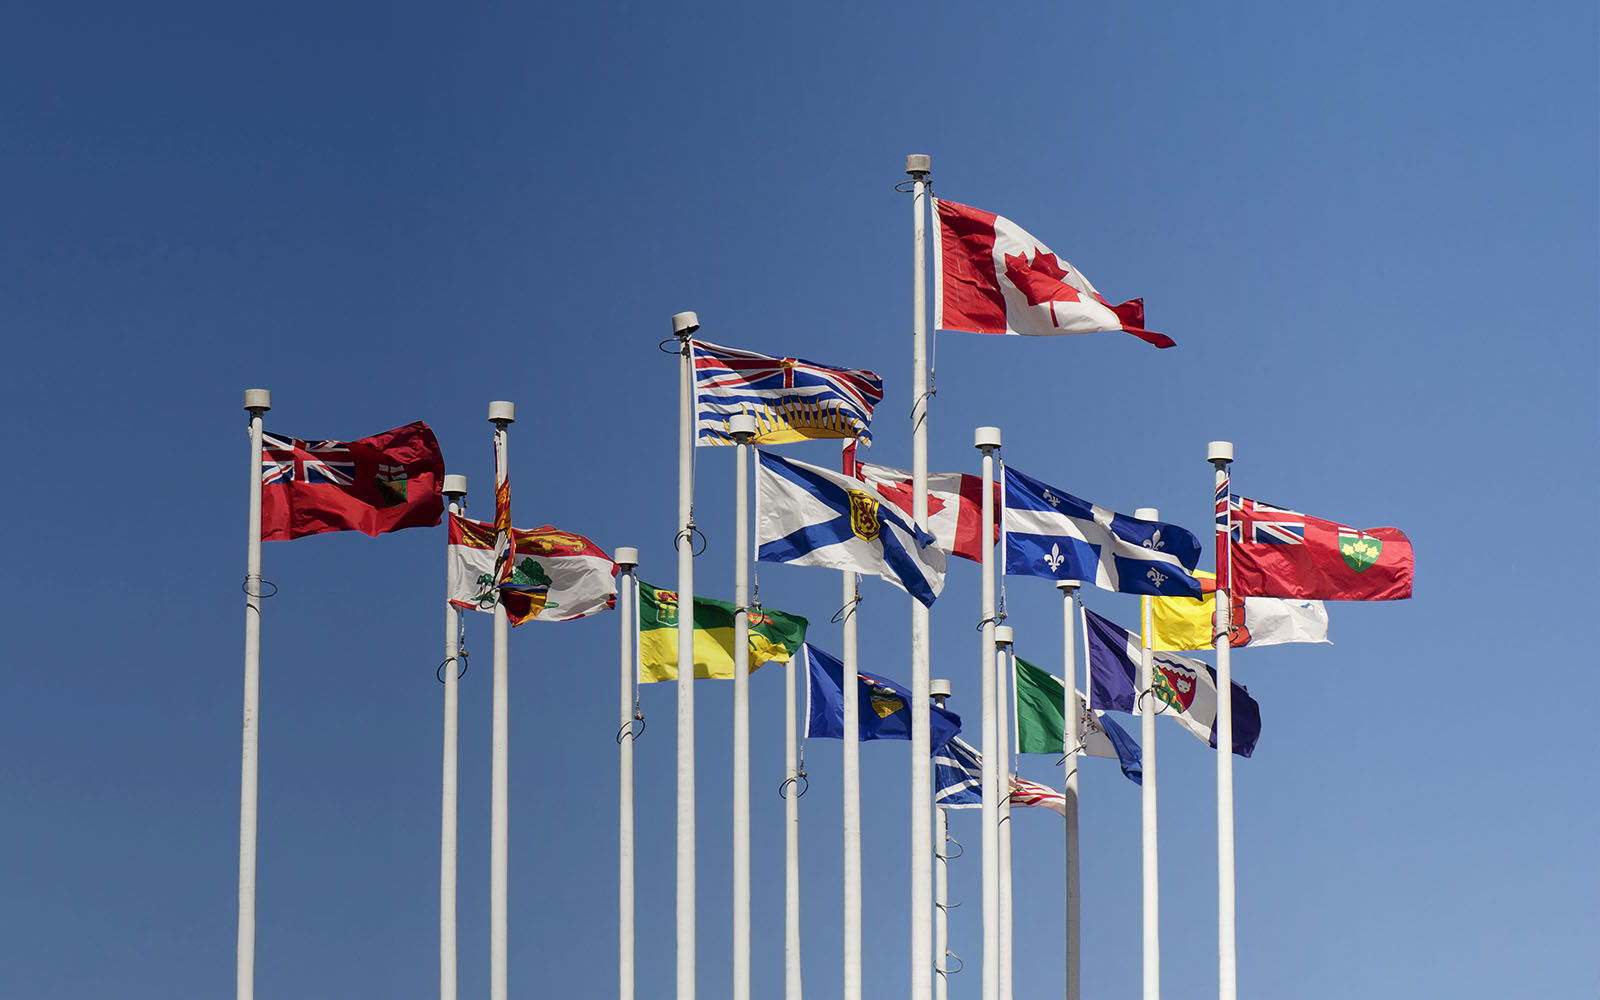 Flags of the Canadian Provinces flying in the wind